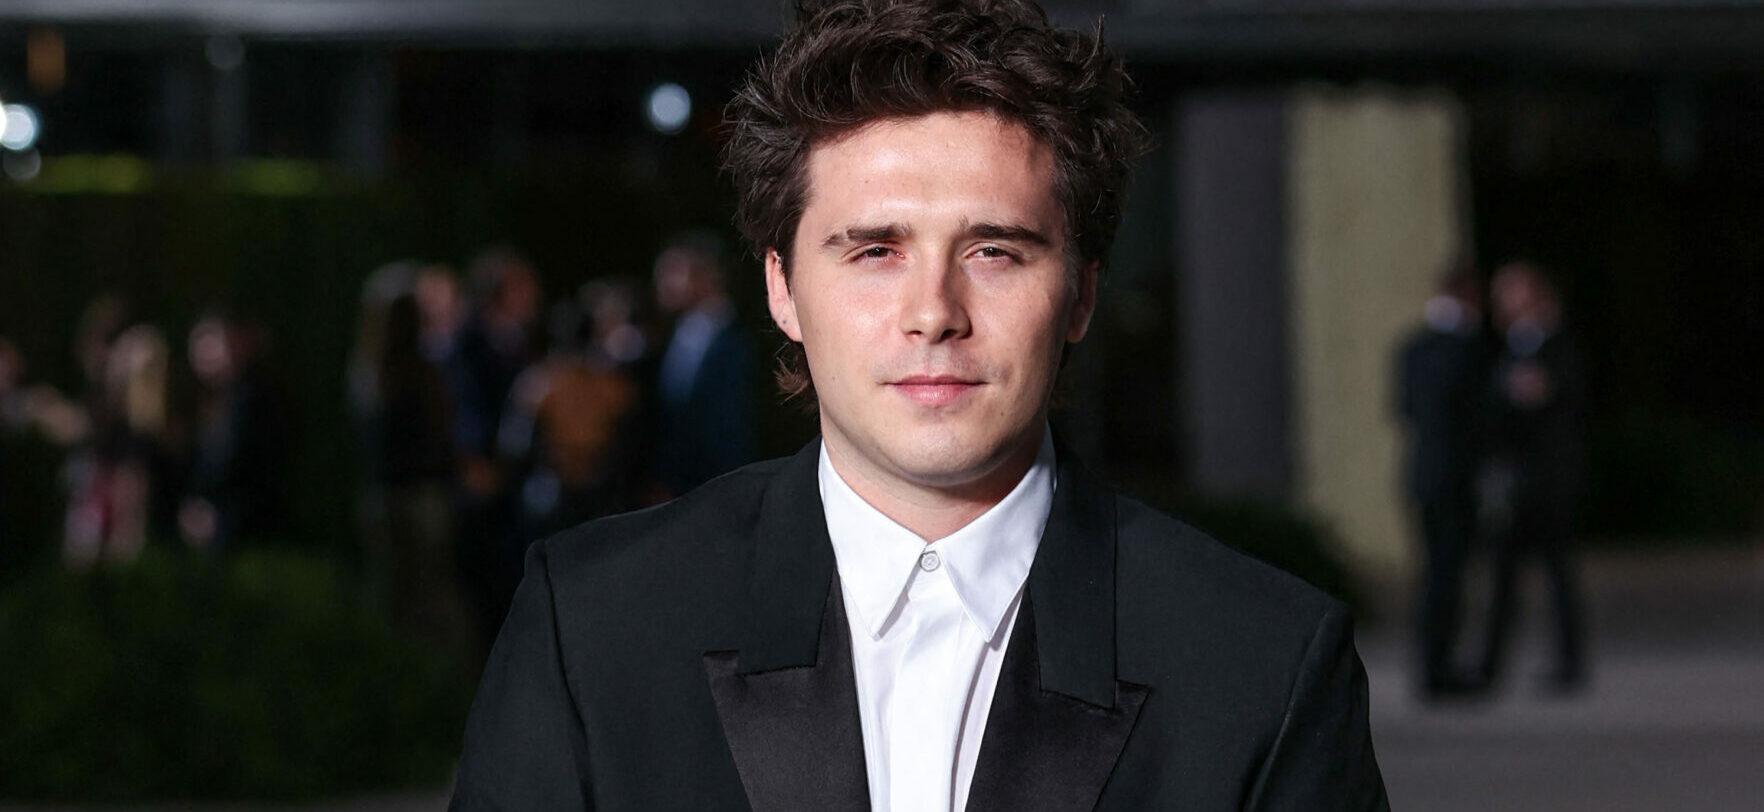 Brooklyn Beckham Gets Beef From His Cooking Video, Mom Victoria Comes To His Defense